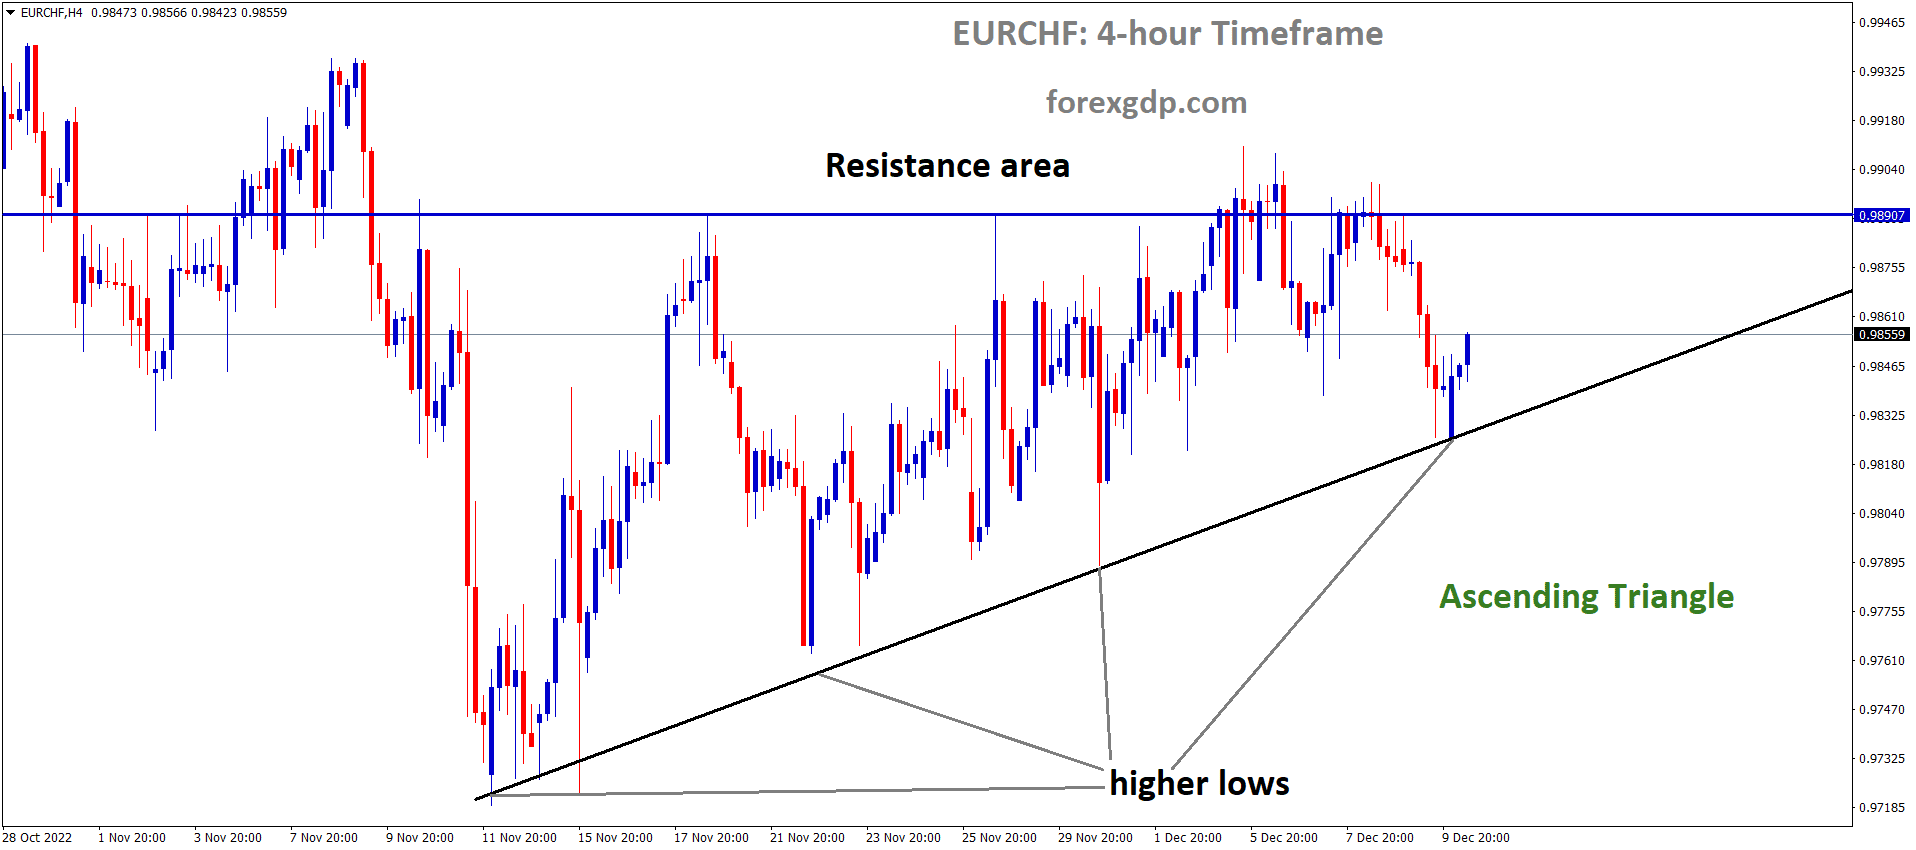 EURCHF is moving in an Ascending triangle pattern and the market has rebounded from the higher low area of the triangle pattern